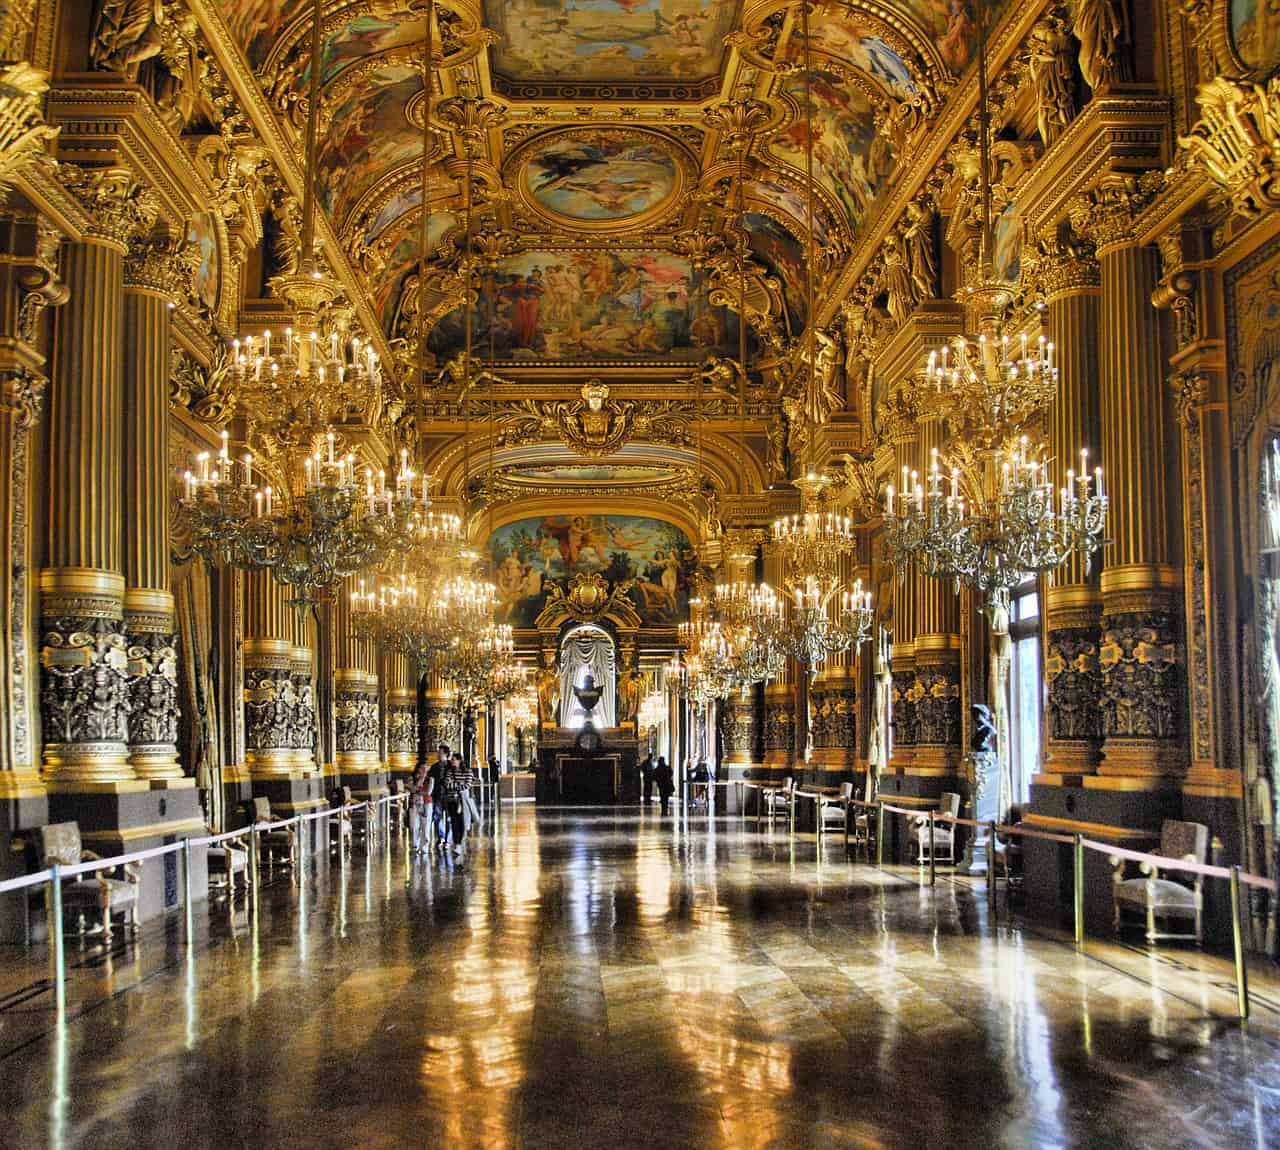 opera garnier in paris is one of the most beautiful places in paris